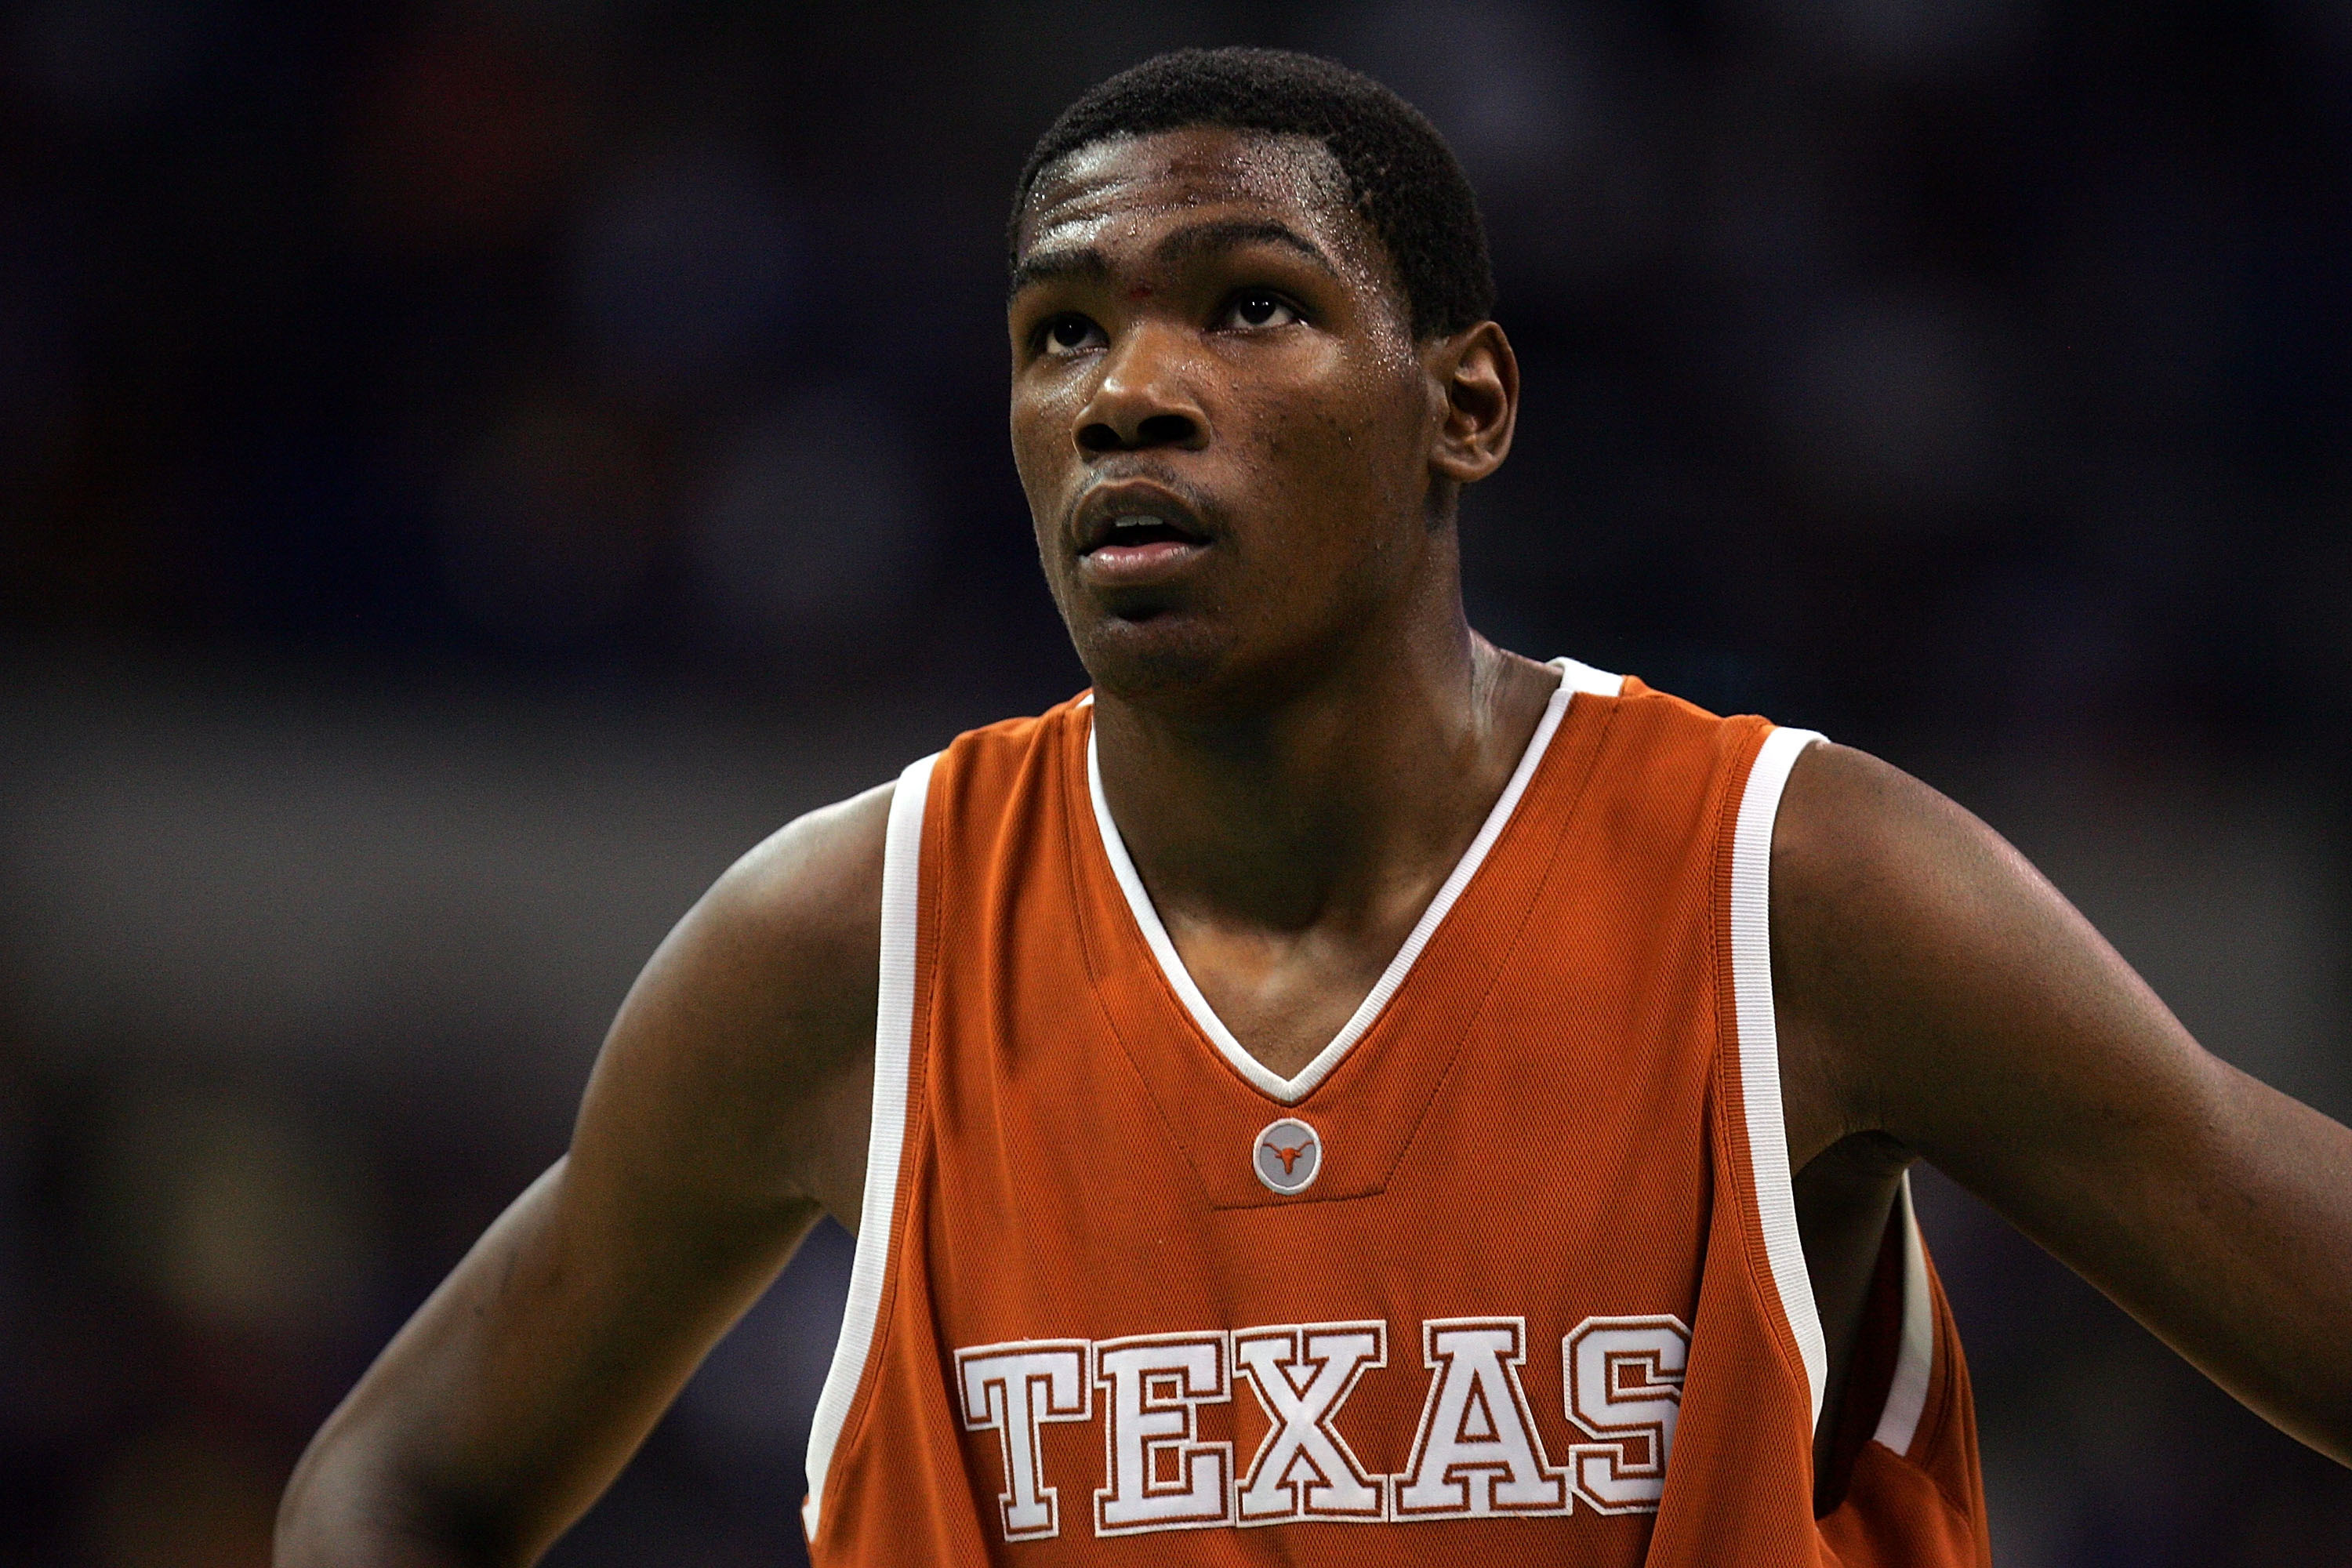 The colleges with the most NBA All-Stars